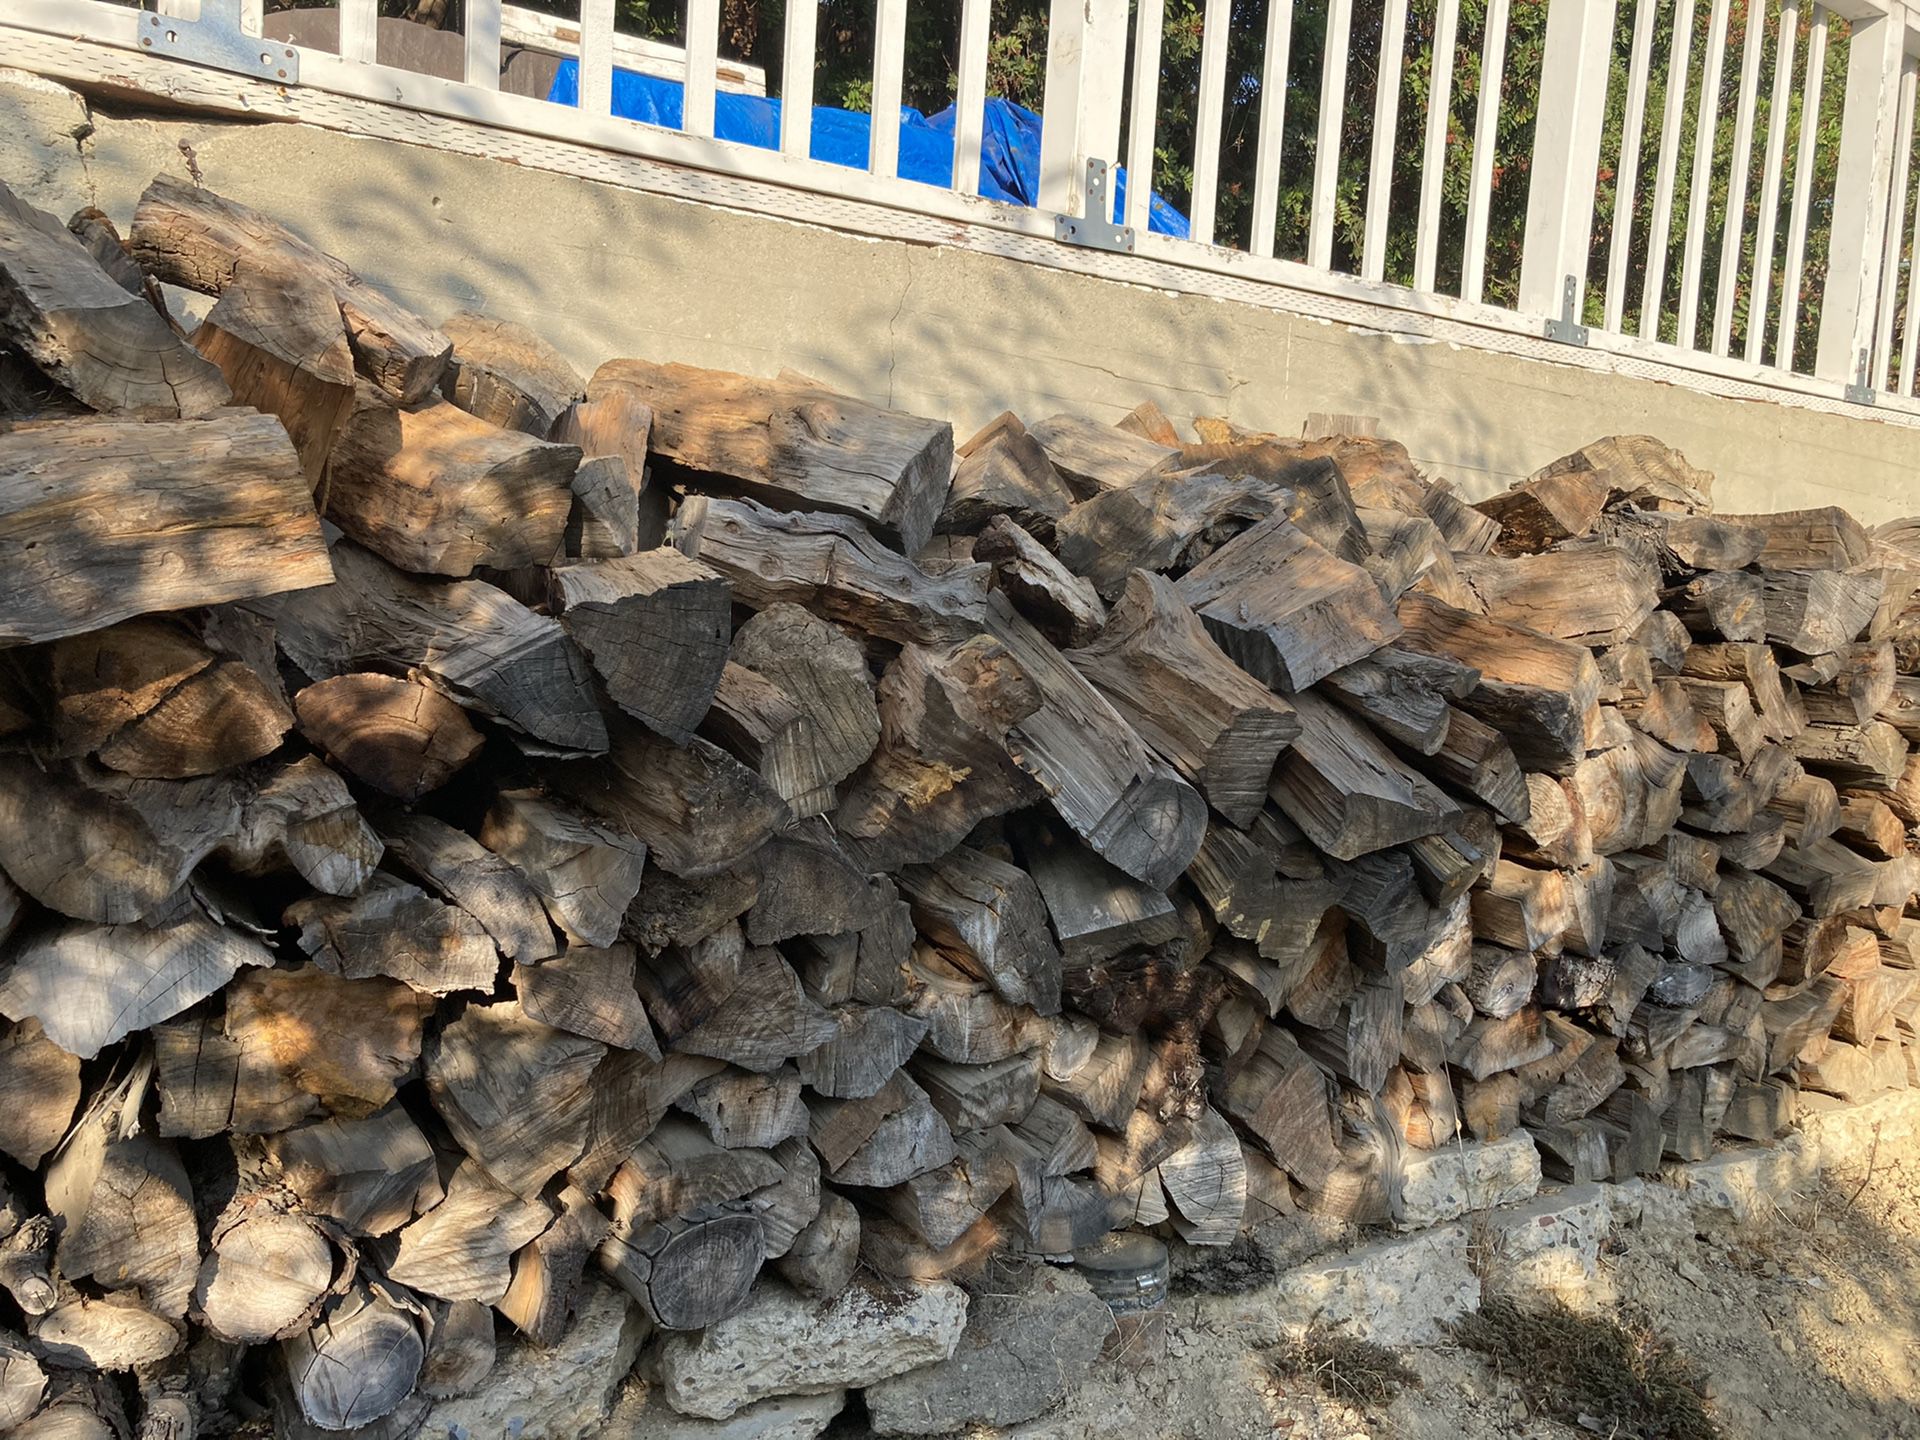 Dry seasoned firewood. $5 a bundle. About 10 pieces.